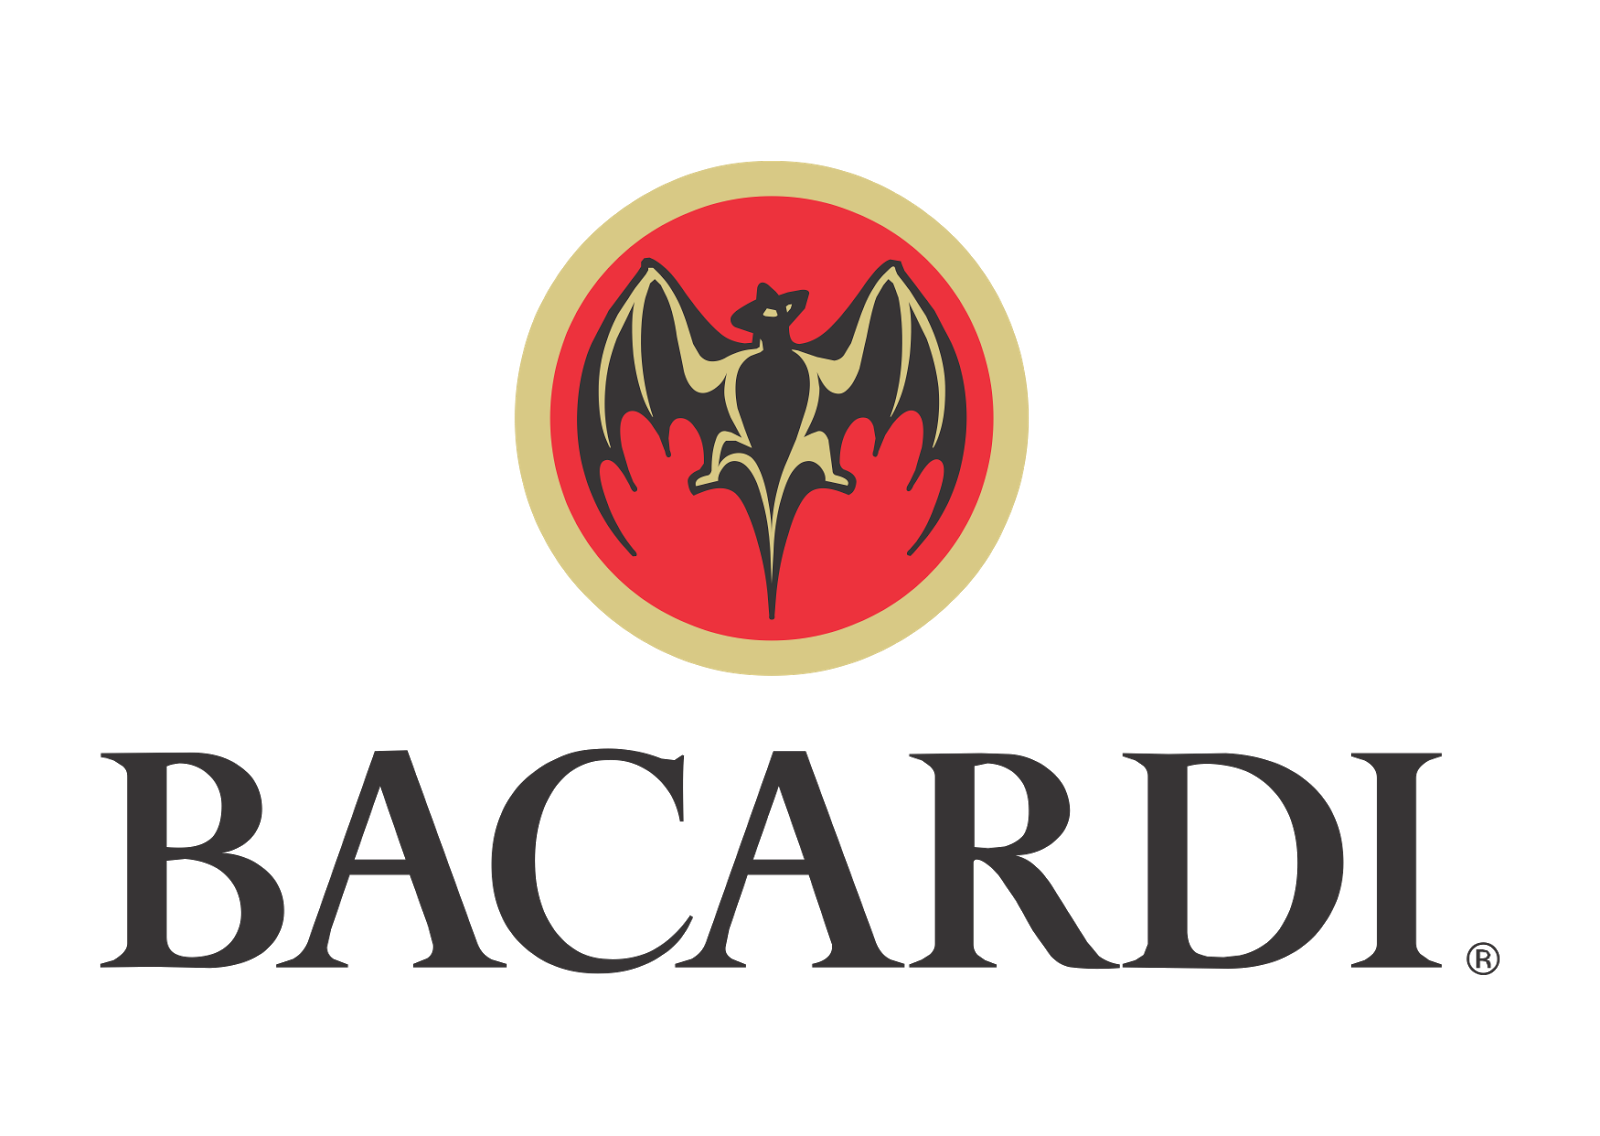 Bacardi Logo Vector, Bacardi Limited Vector PNG - Free PNG